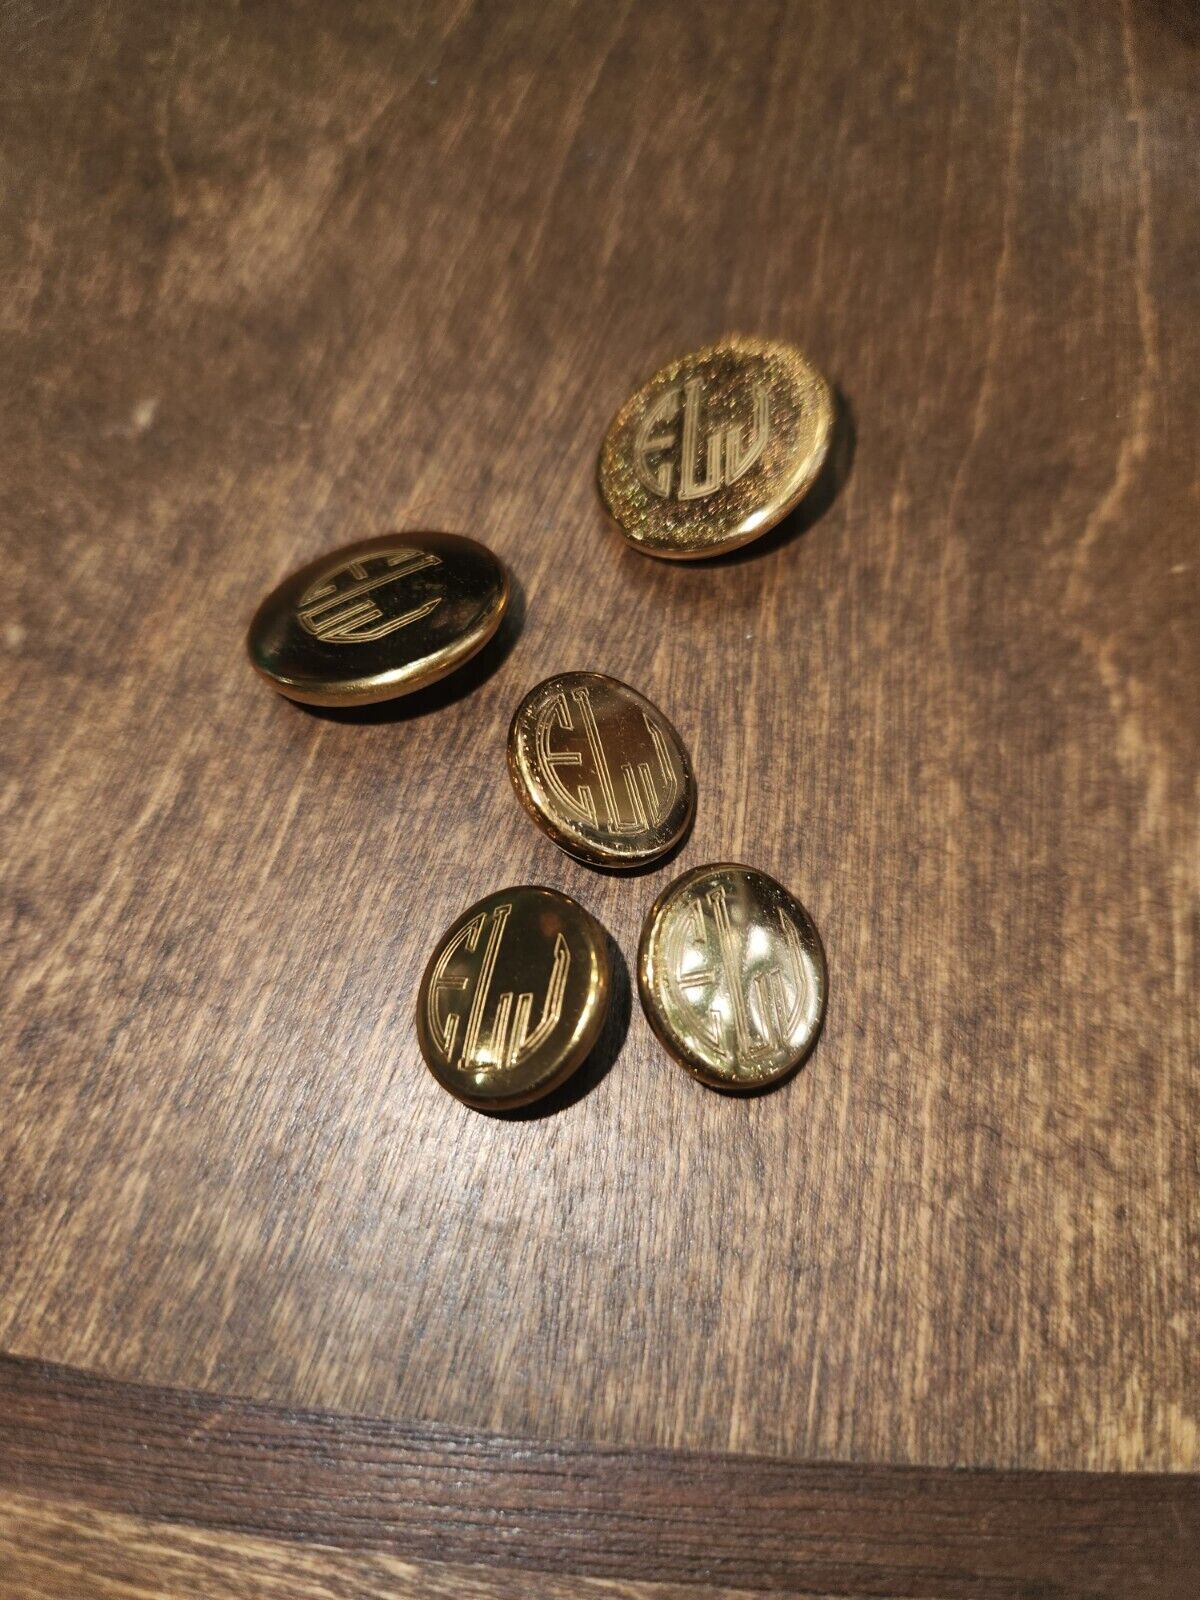 Woodbury Vintage Gold Color Monogramed Buttons 8 Total With Initials ELJ 